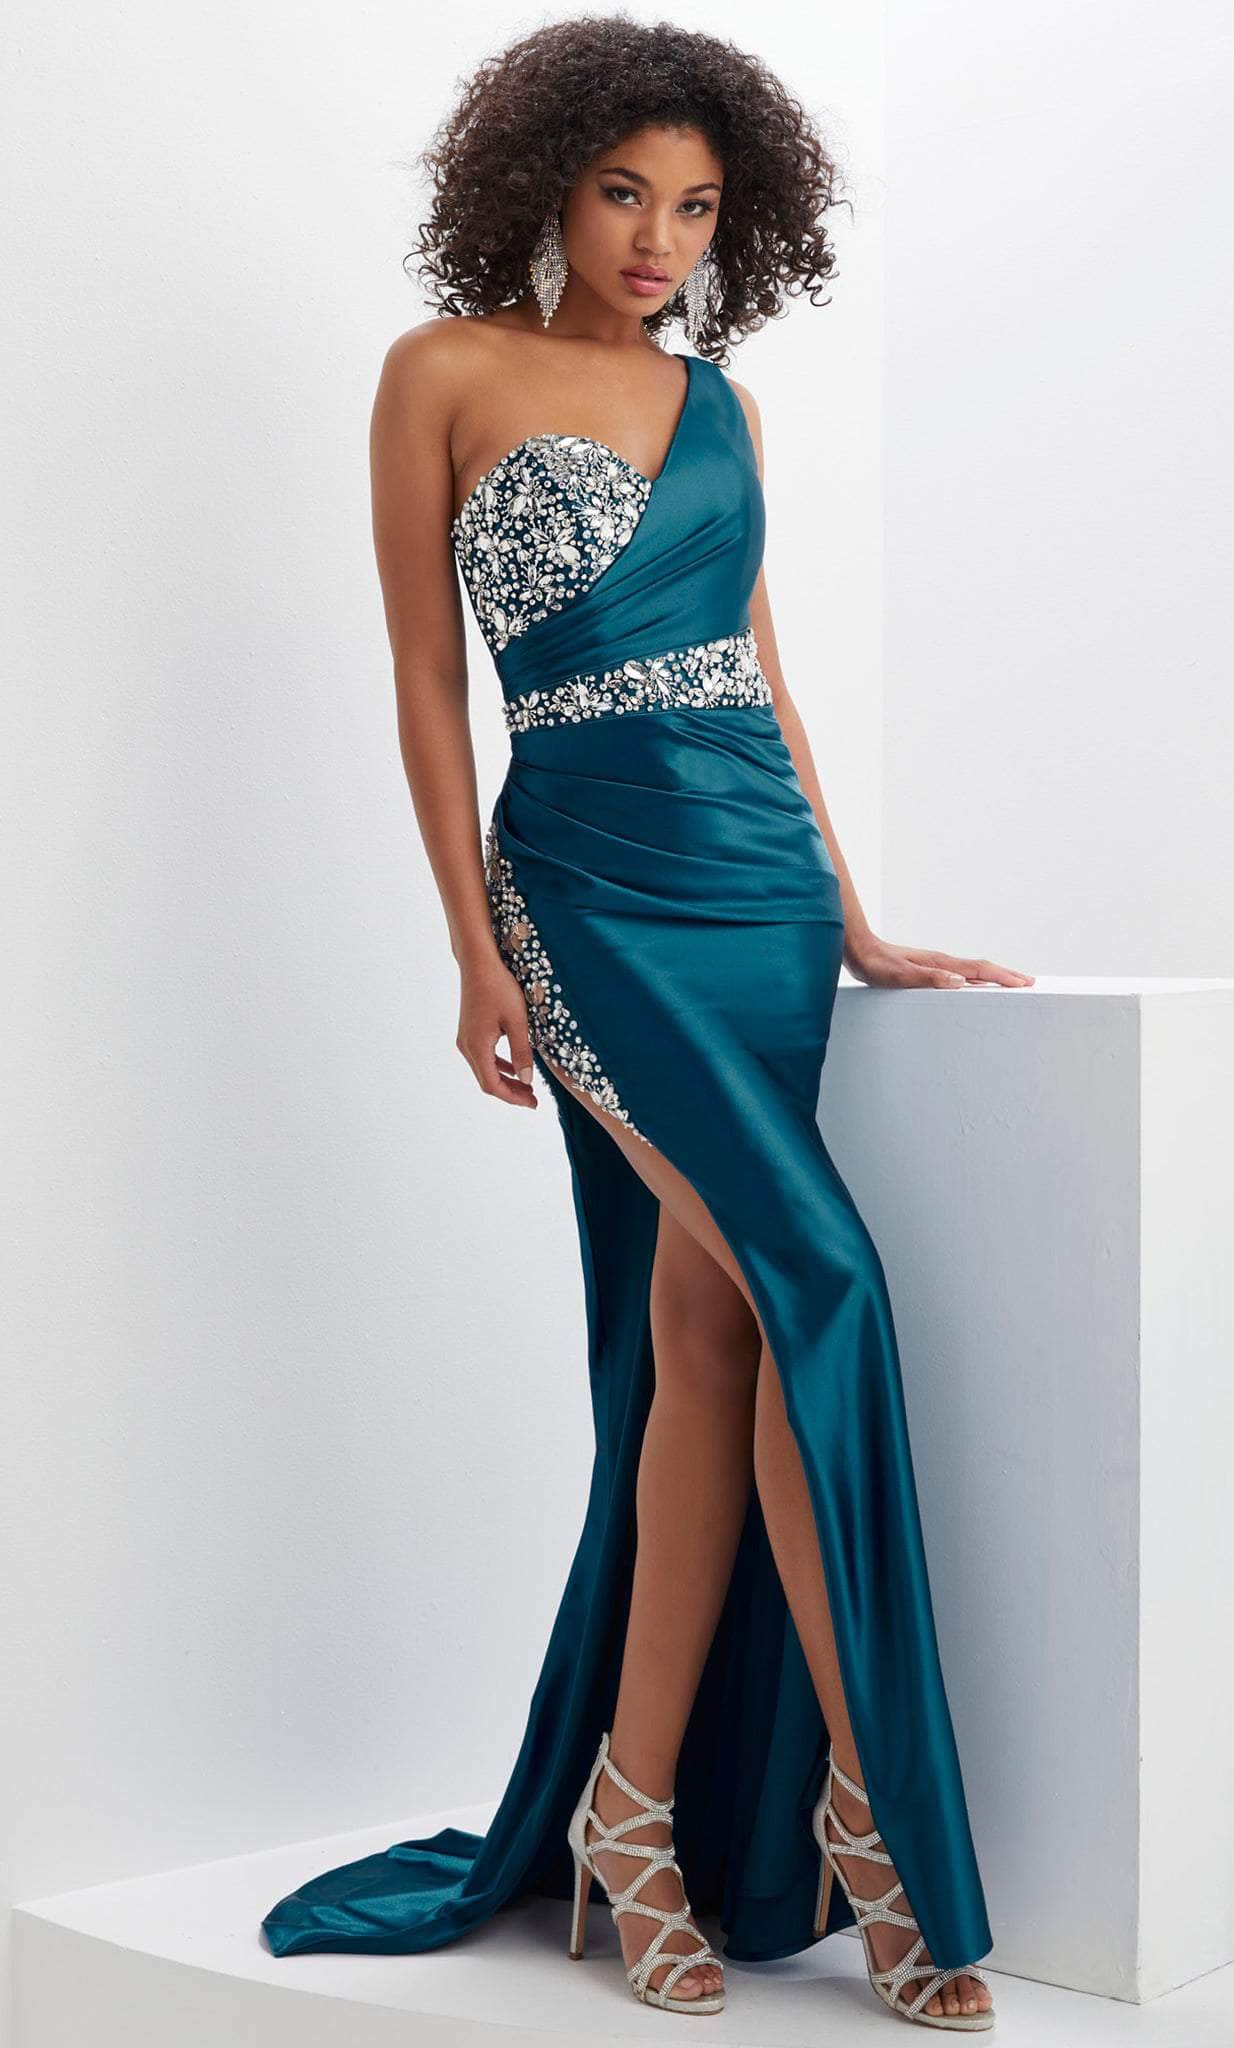 Image of Panoply 14141 - Asymmetric Neck High Slit Evening Gown